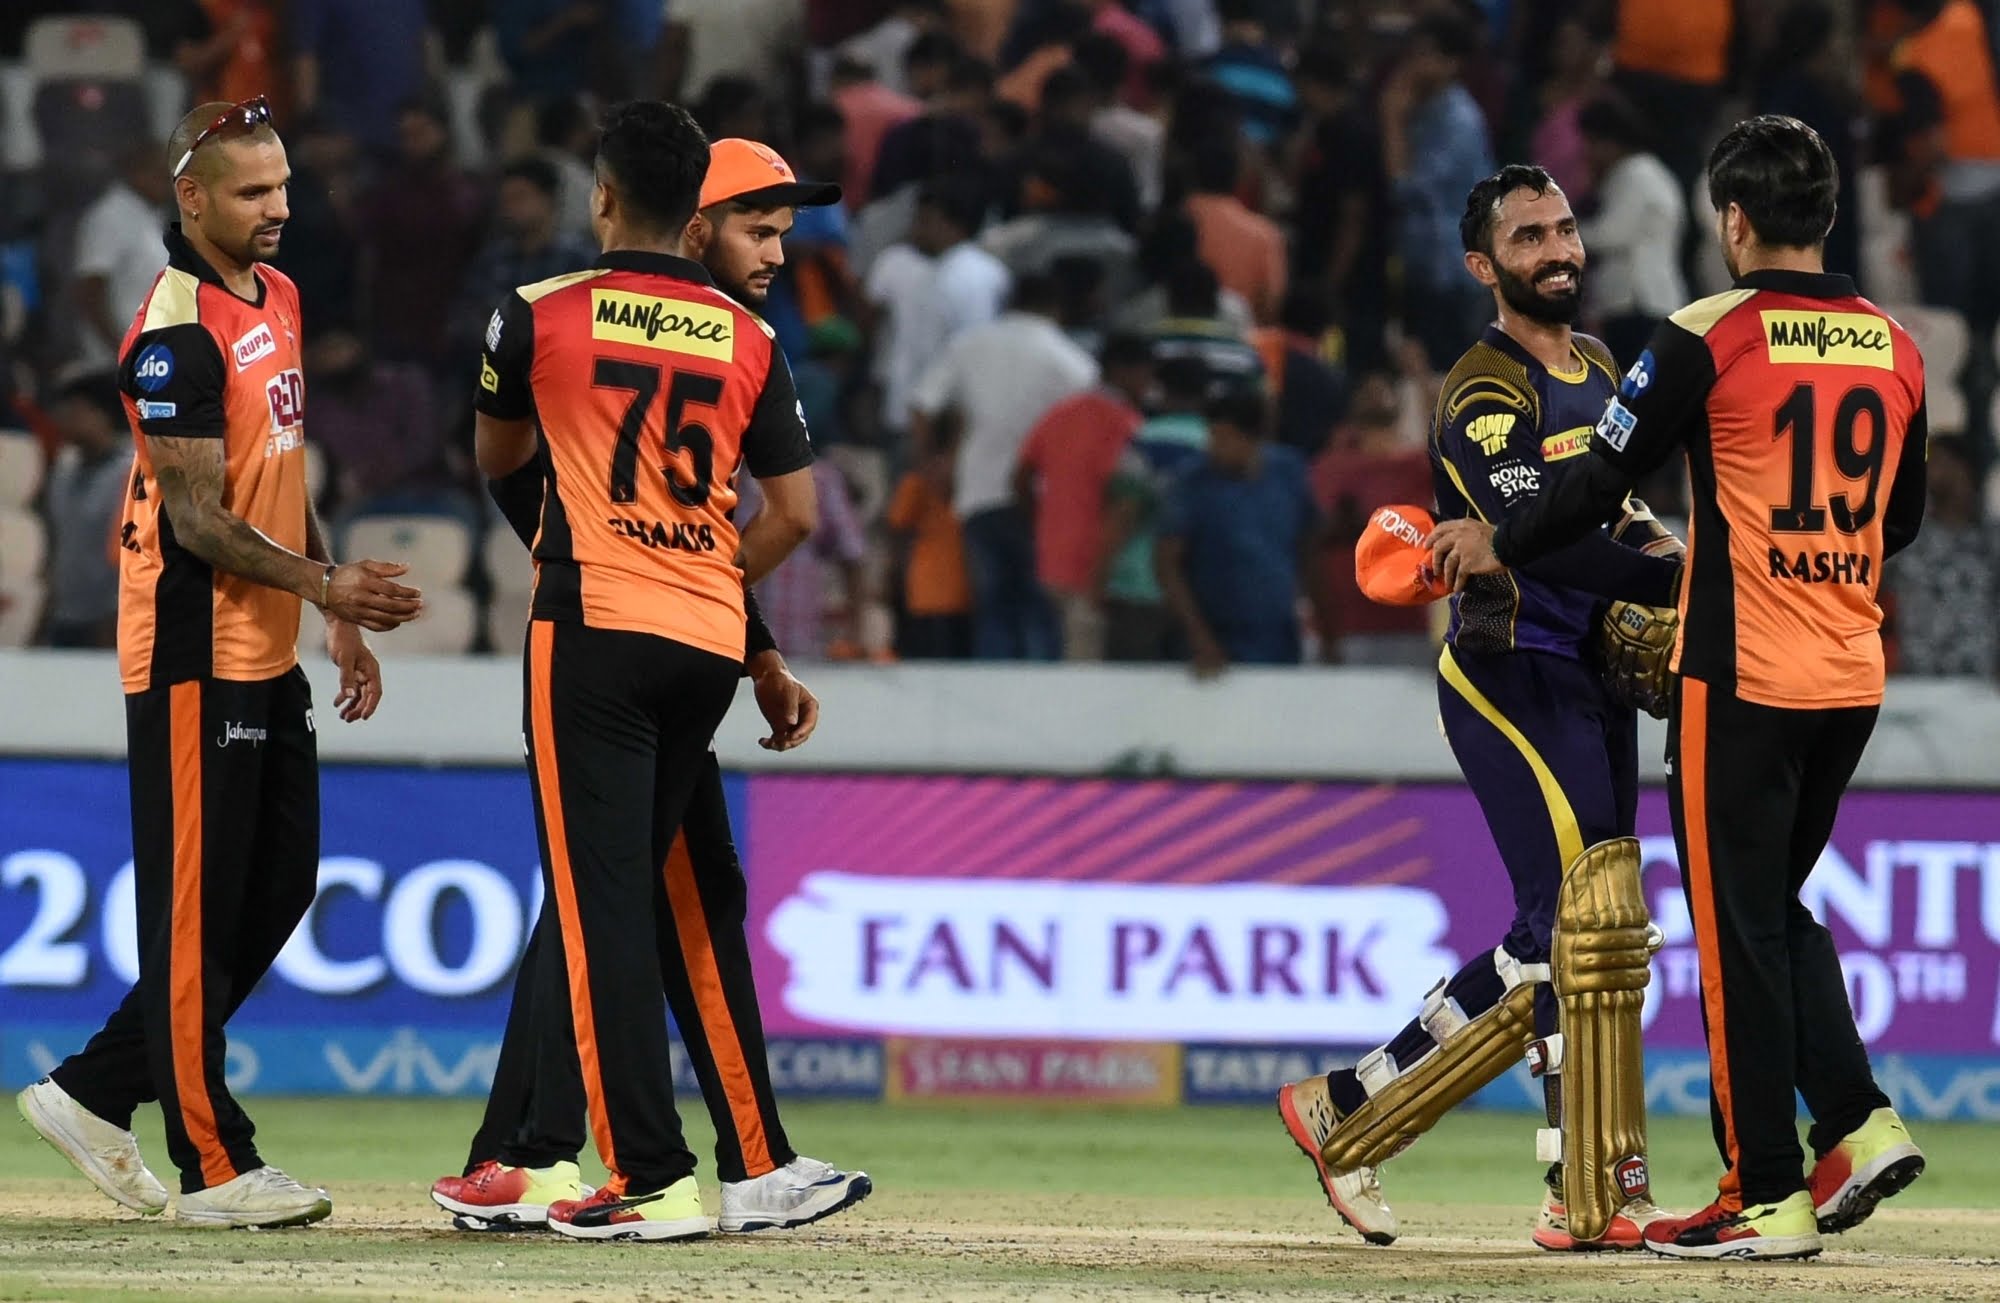 IPL 2019 Match 38 (SRH vs KKR) Five Things To Watchout In The Game